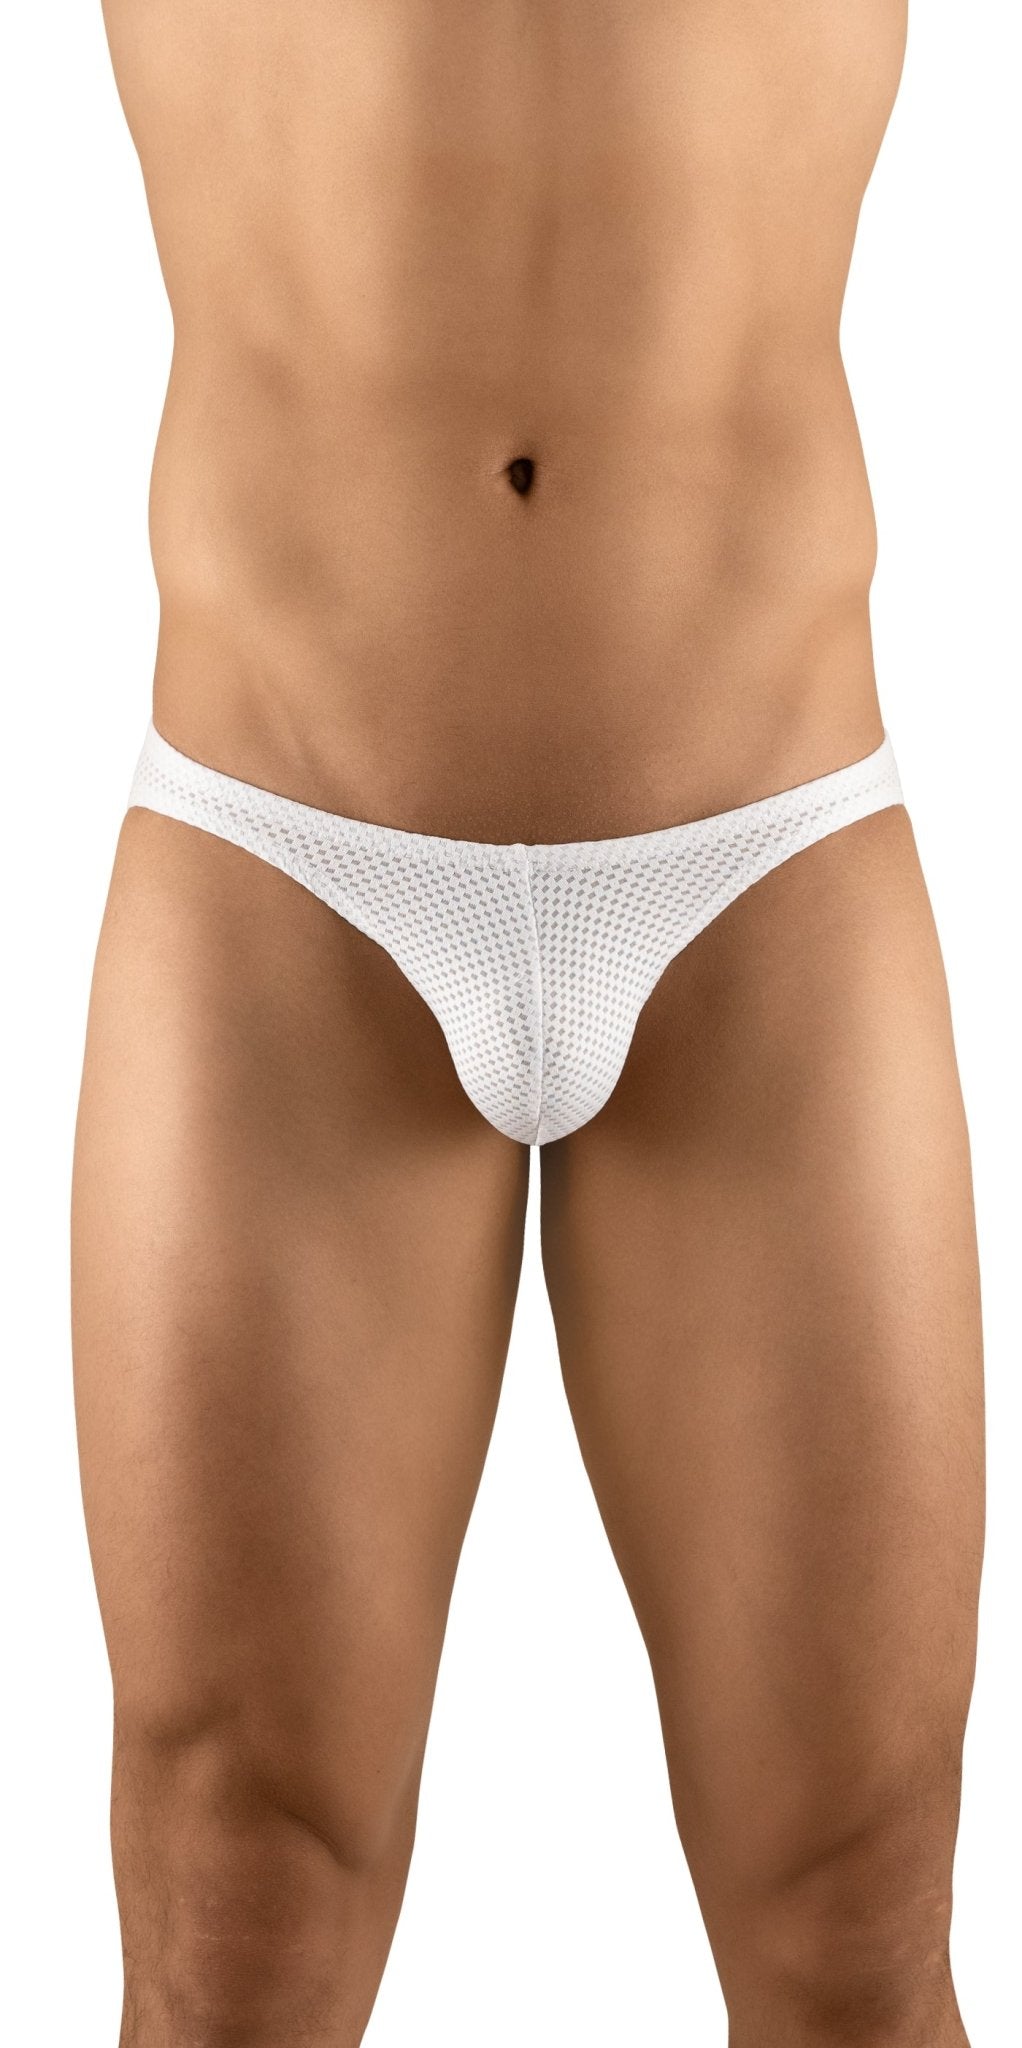 Ergowear White Gym Shorts With Built In Thong - Johnny Beach